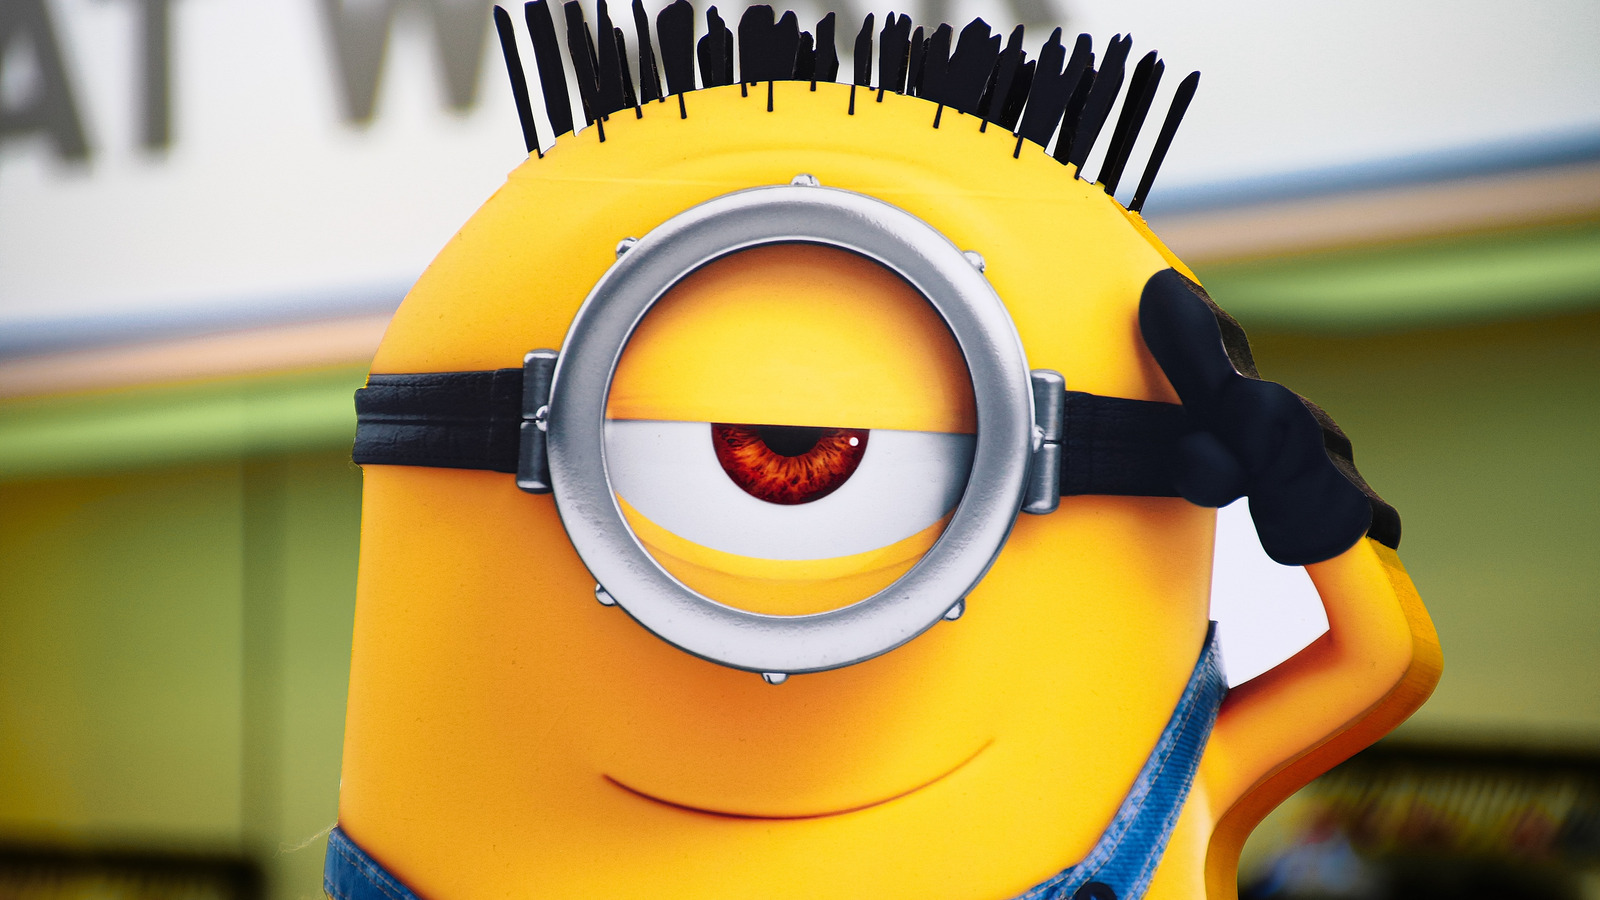 10 Despicable Me Characters Ranked Worst To Best